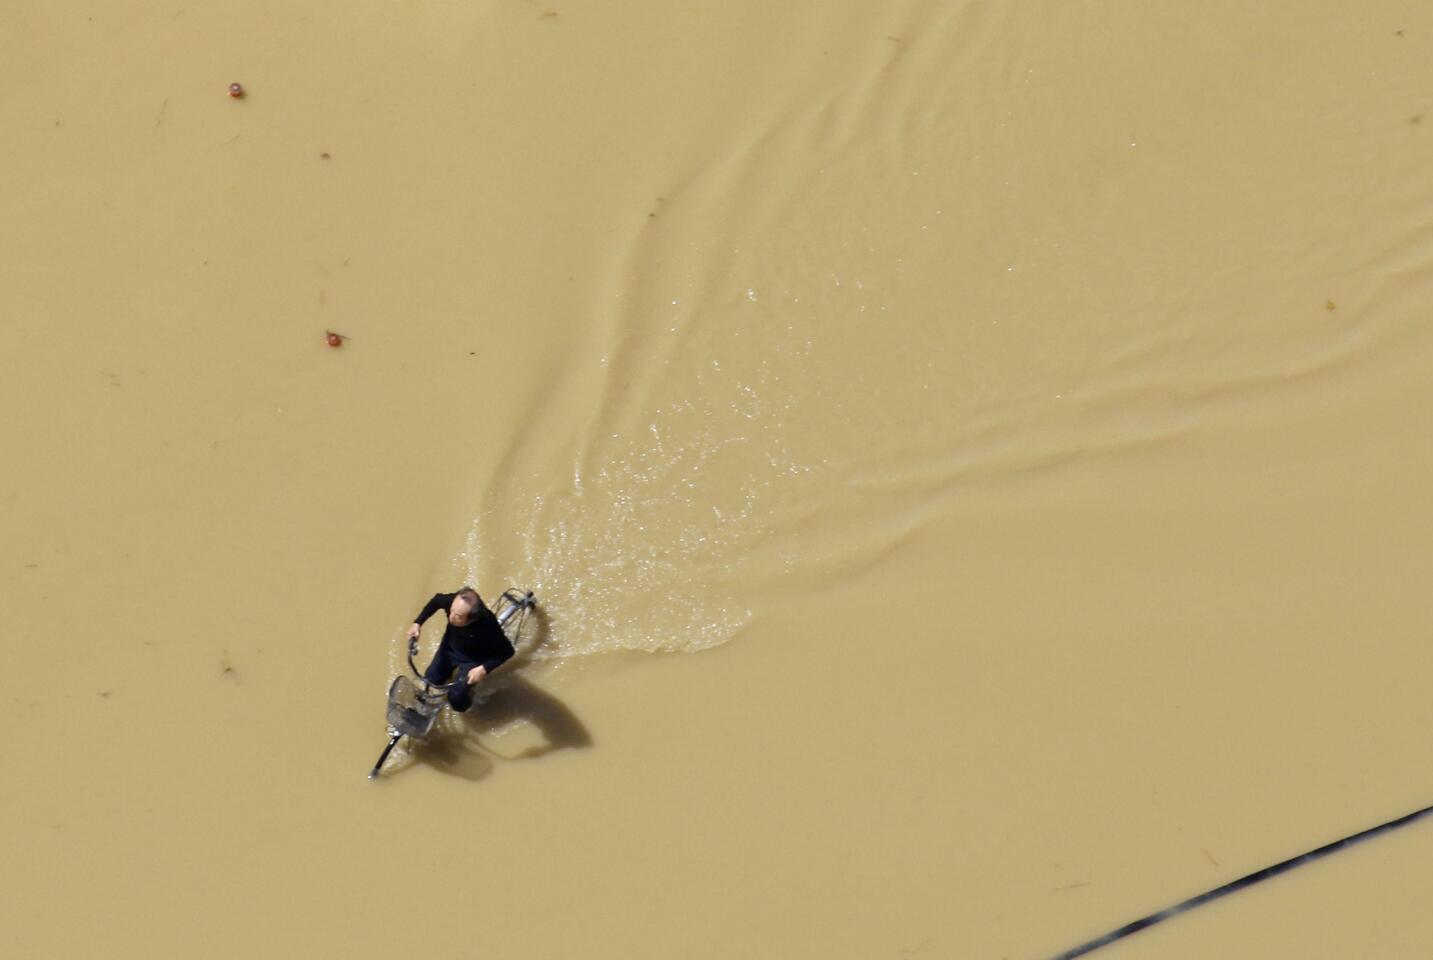 A man rides a bicycle in a road flooded with murky water in Joso, Japan, Sept. 11, 2015.